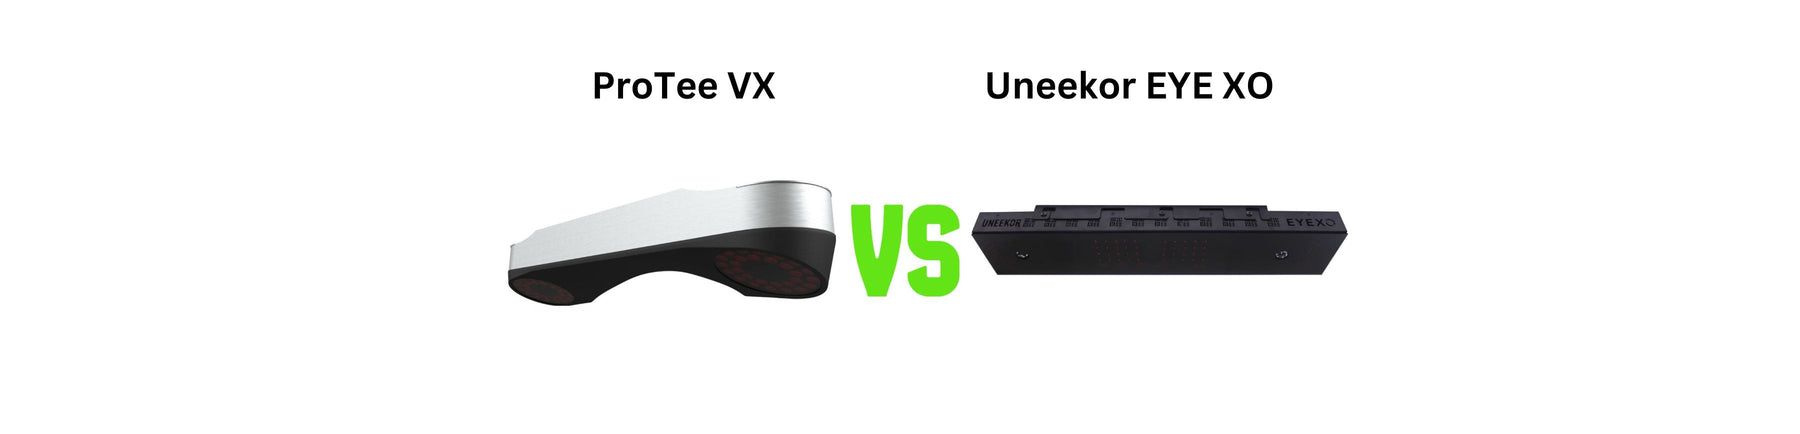 Unveiling the Finest: ProTee VX vs. Uneekor EYE XO